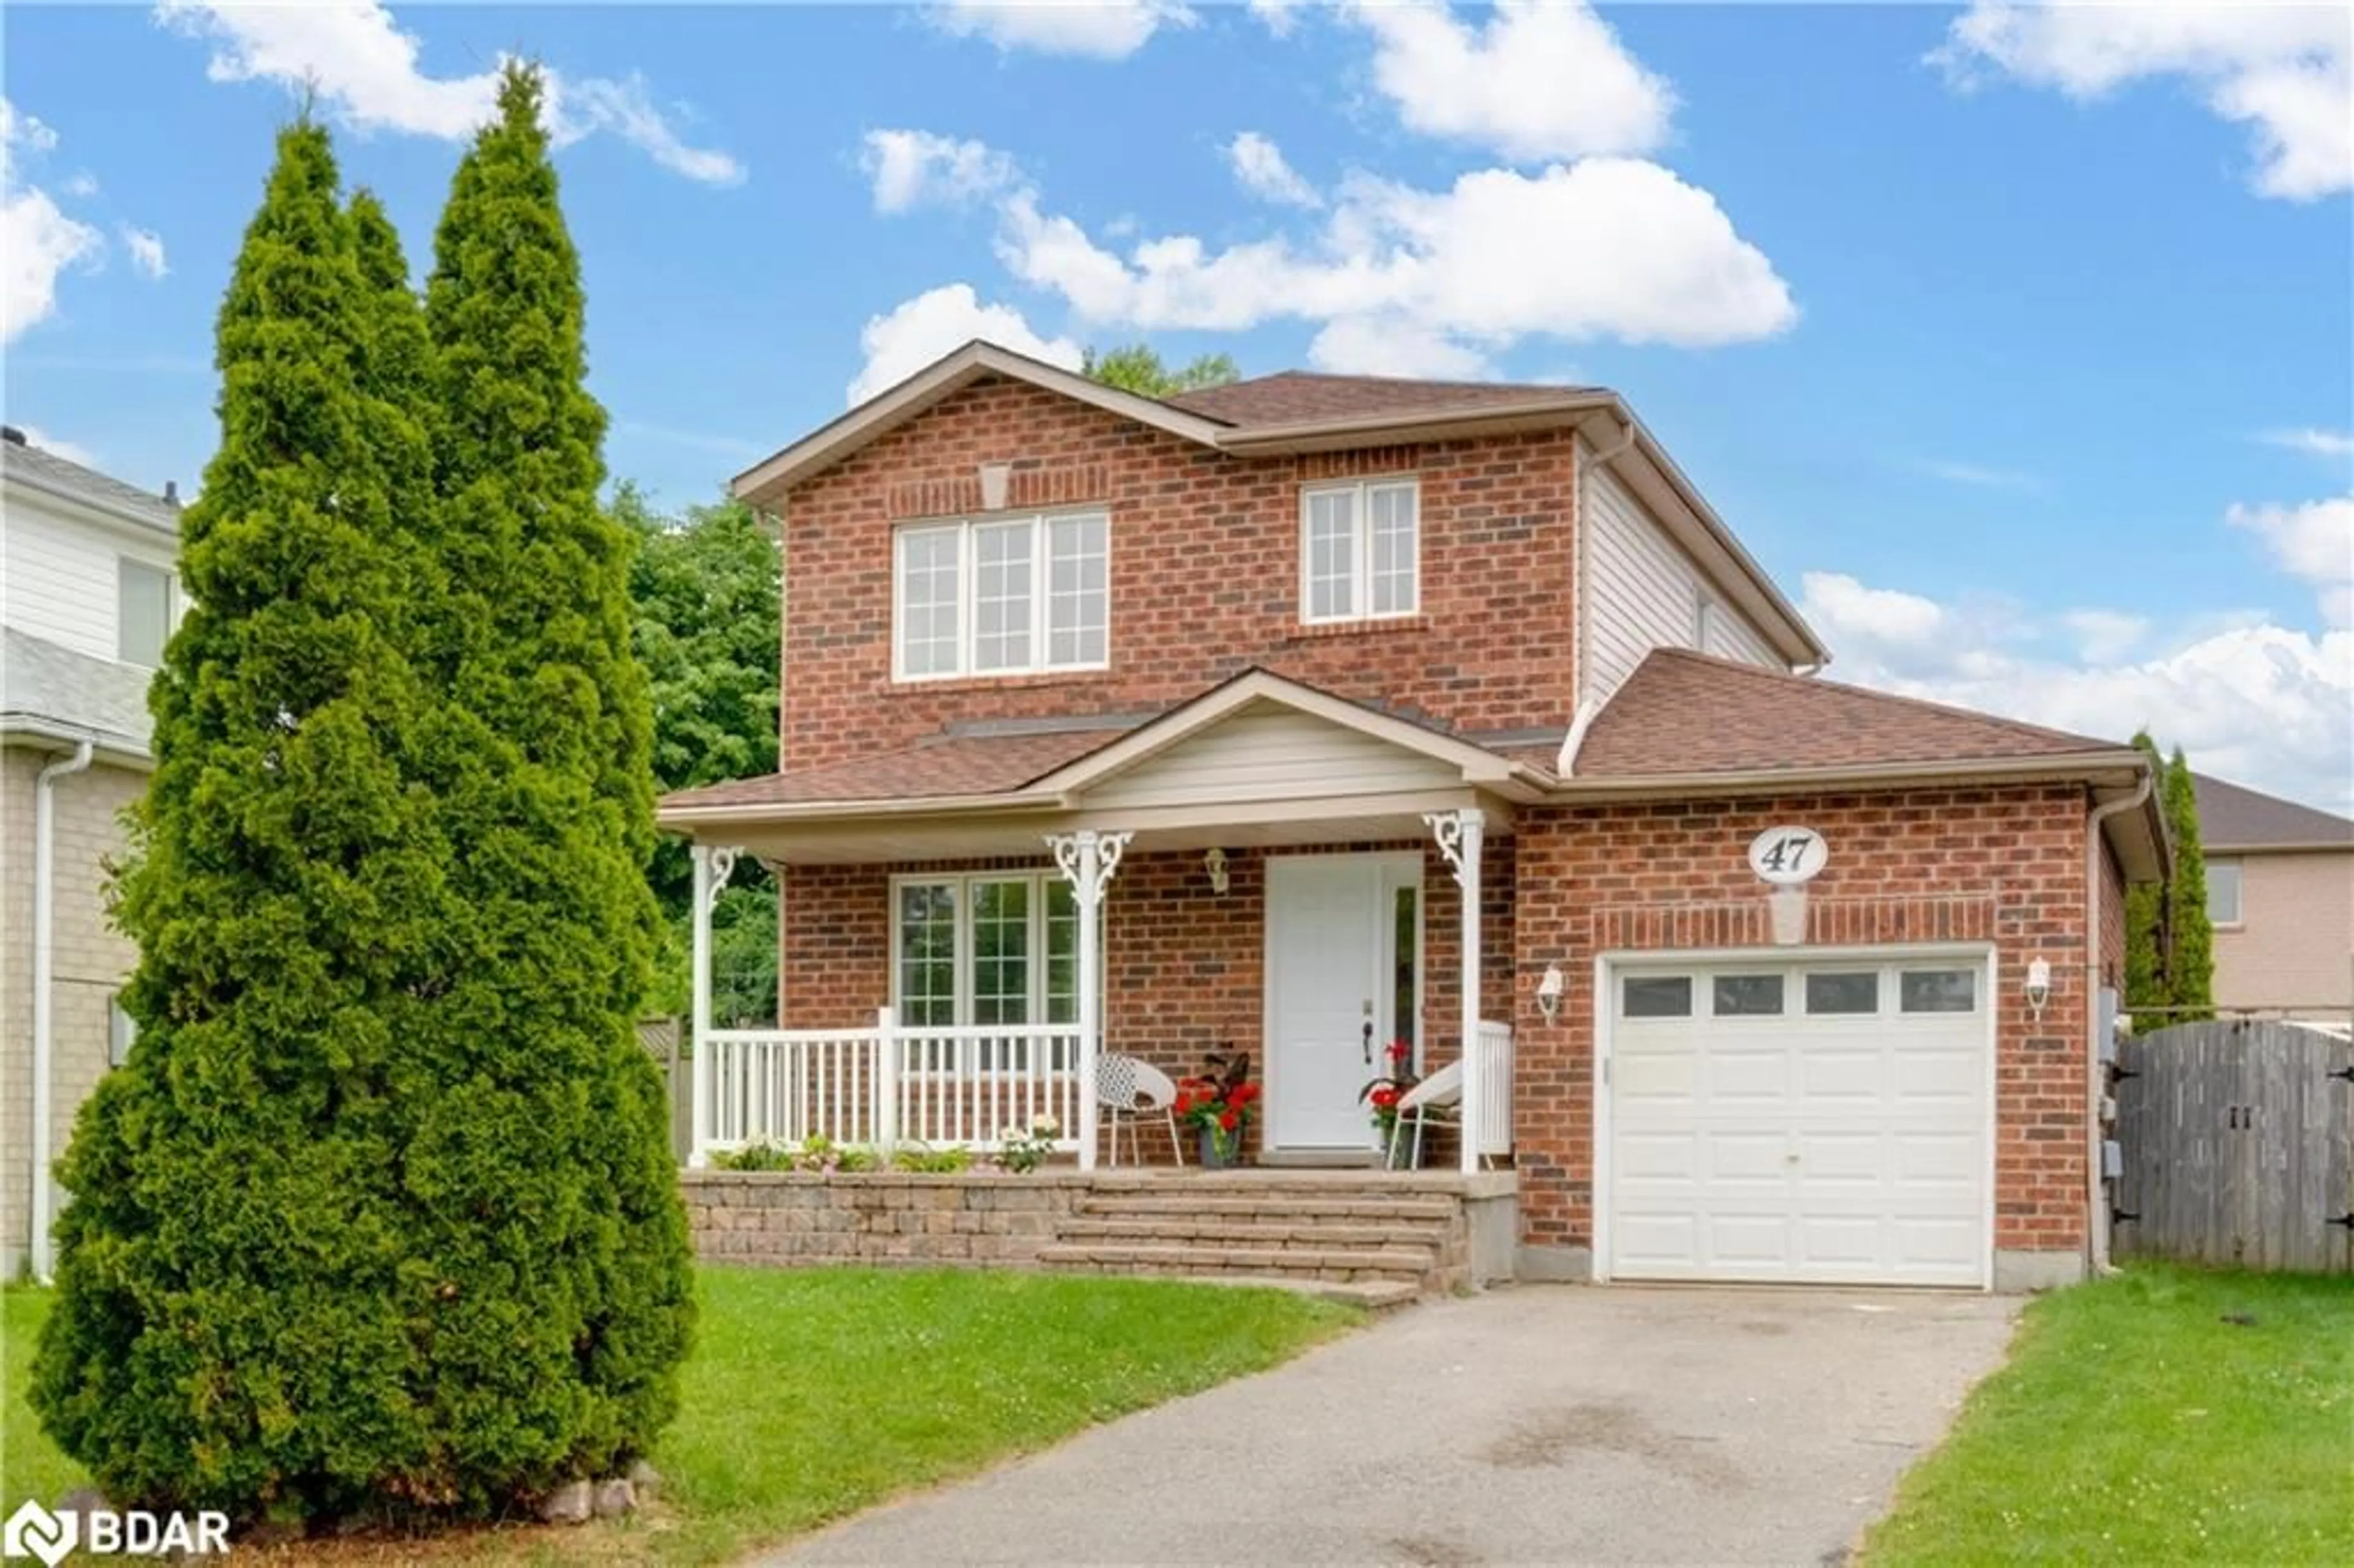 Home with brick exterior material for 47 Golds Cres, Barrie Ontario L4N 8R5